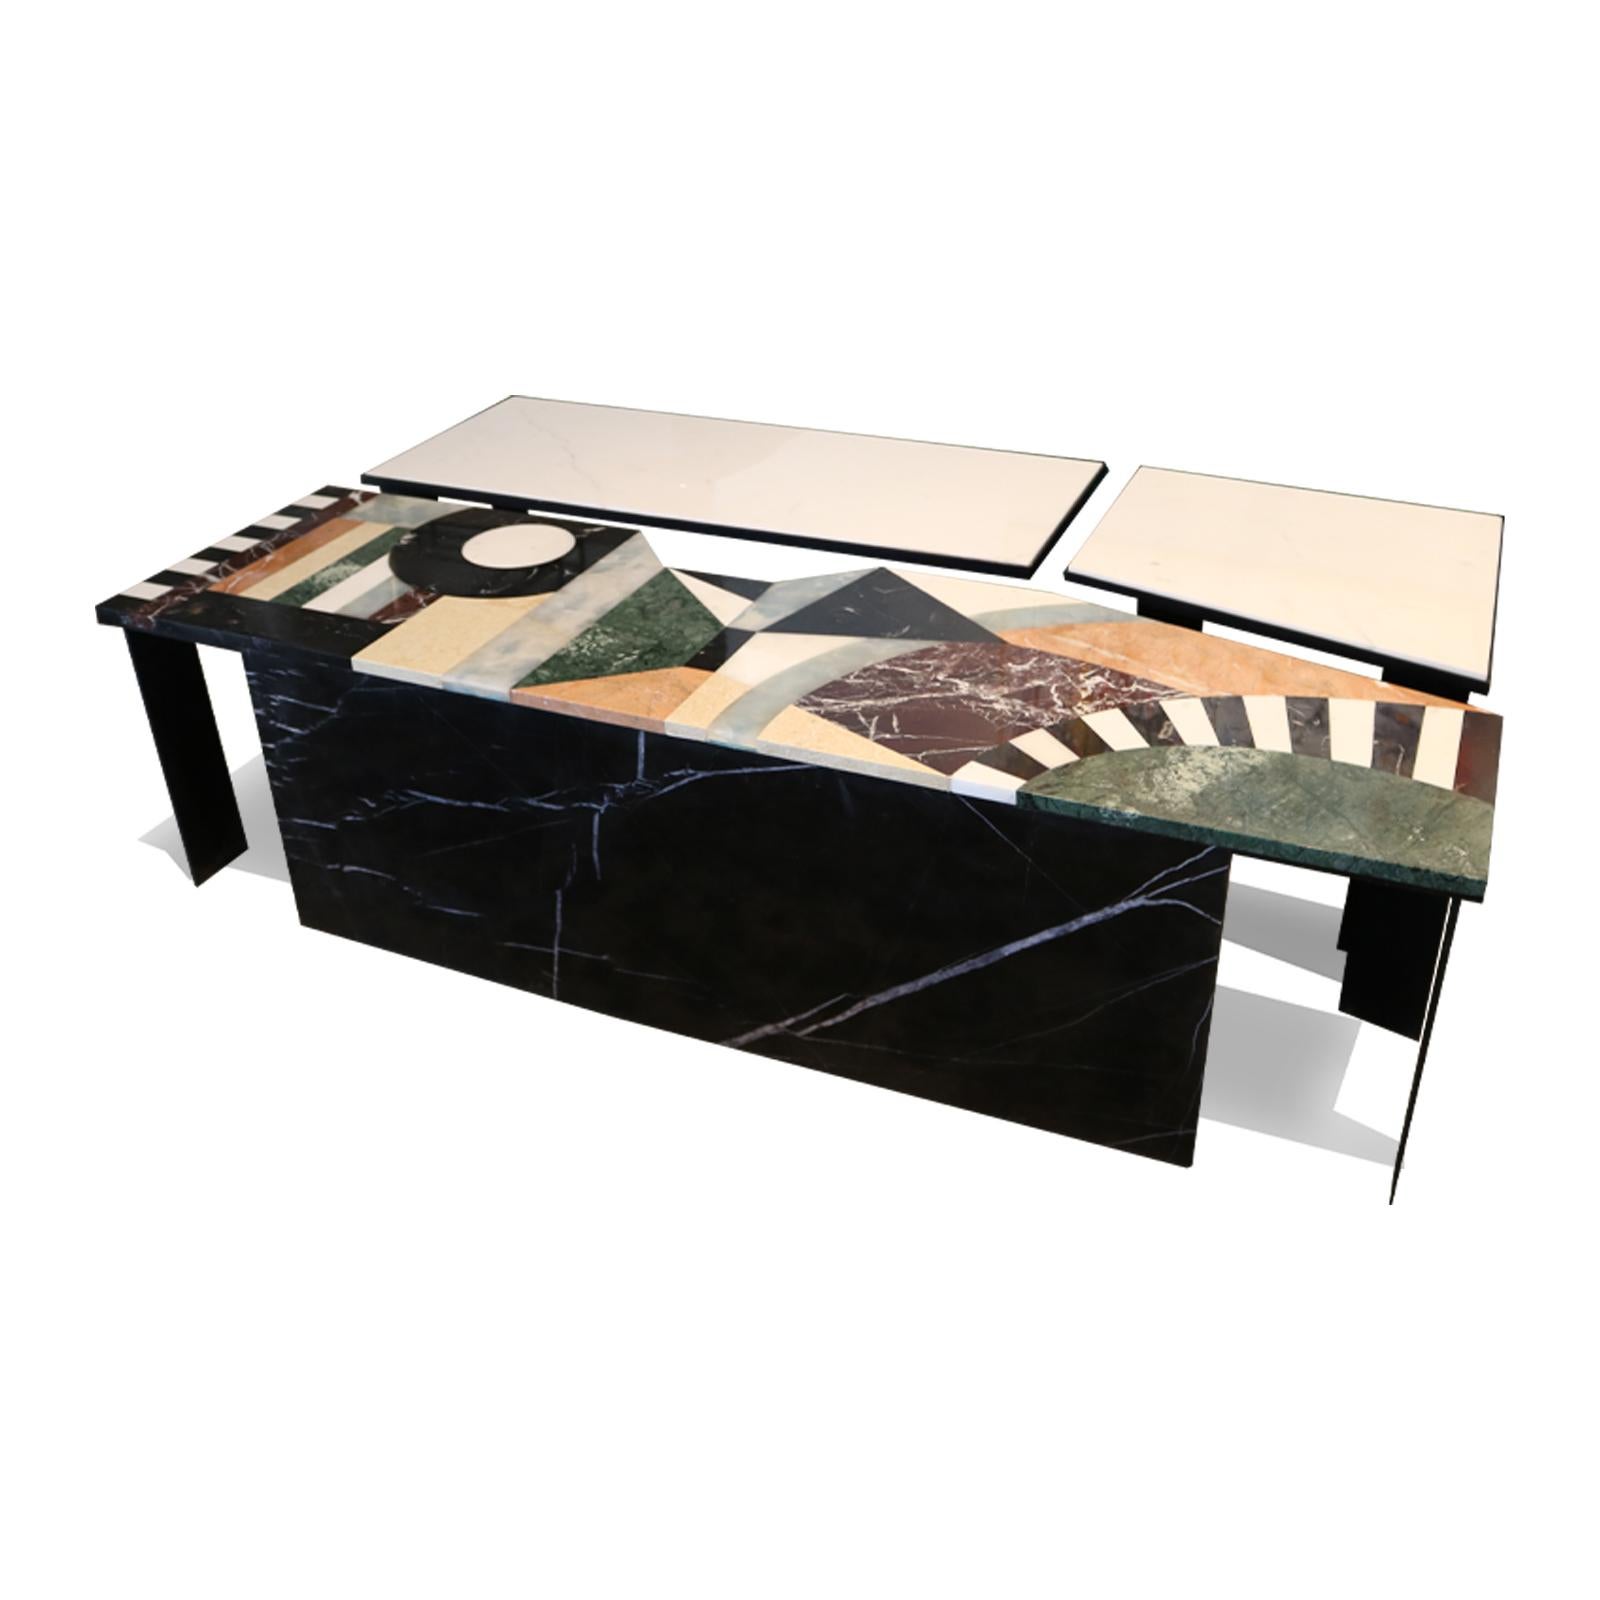 Introducing a remarkable fusion of simplicity and intricacy, we present to you a set of three breathtaking marble tables. These exquisite pieces embody a harmonious blend of patterns and colors, seamlessly integrated to create a magnificent